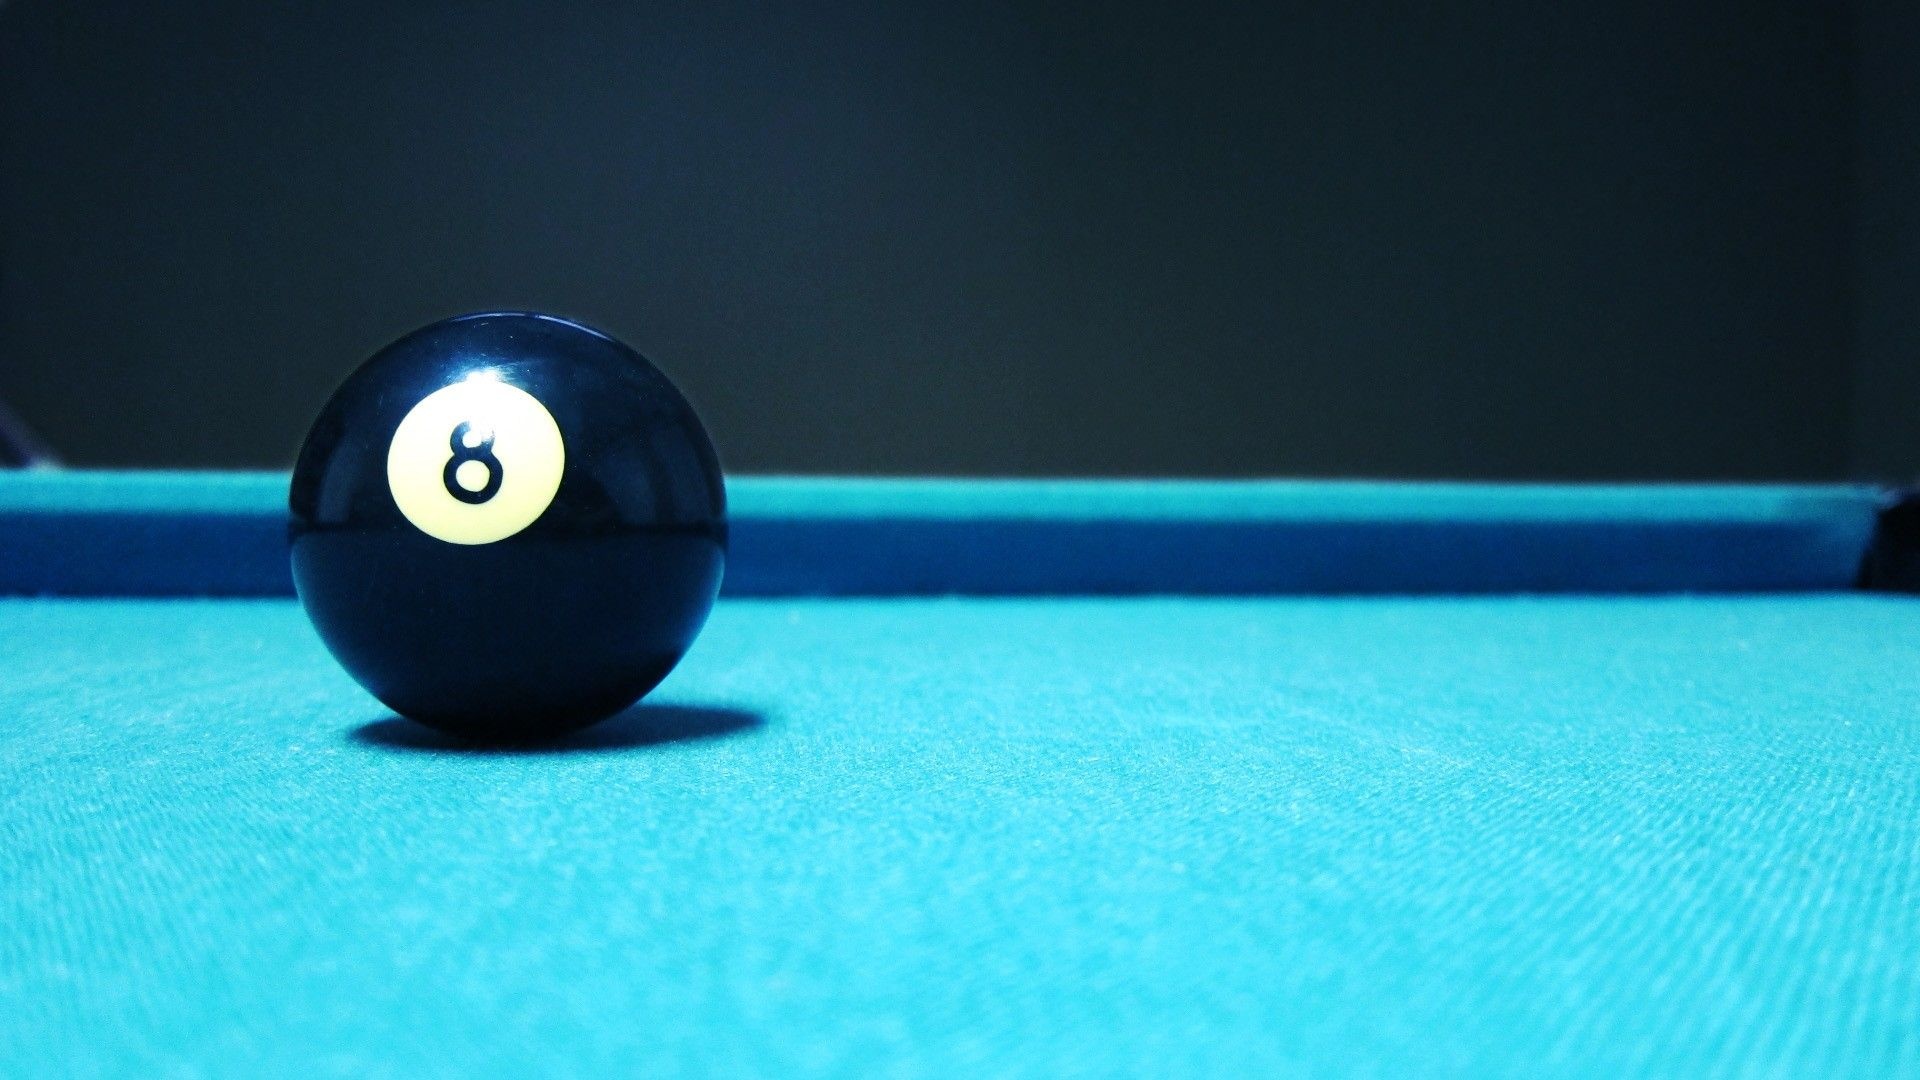 Pool (Cue Sports): Pocket billiards, The solid black object ball, The symbol of the eight-ball game. 1920x1080 Full HD Background.